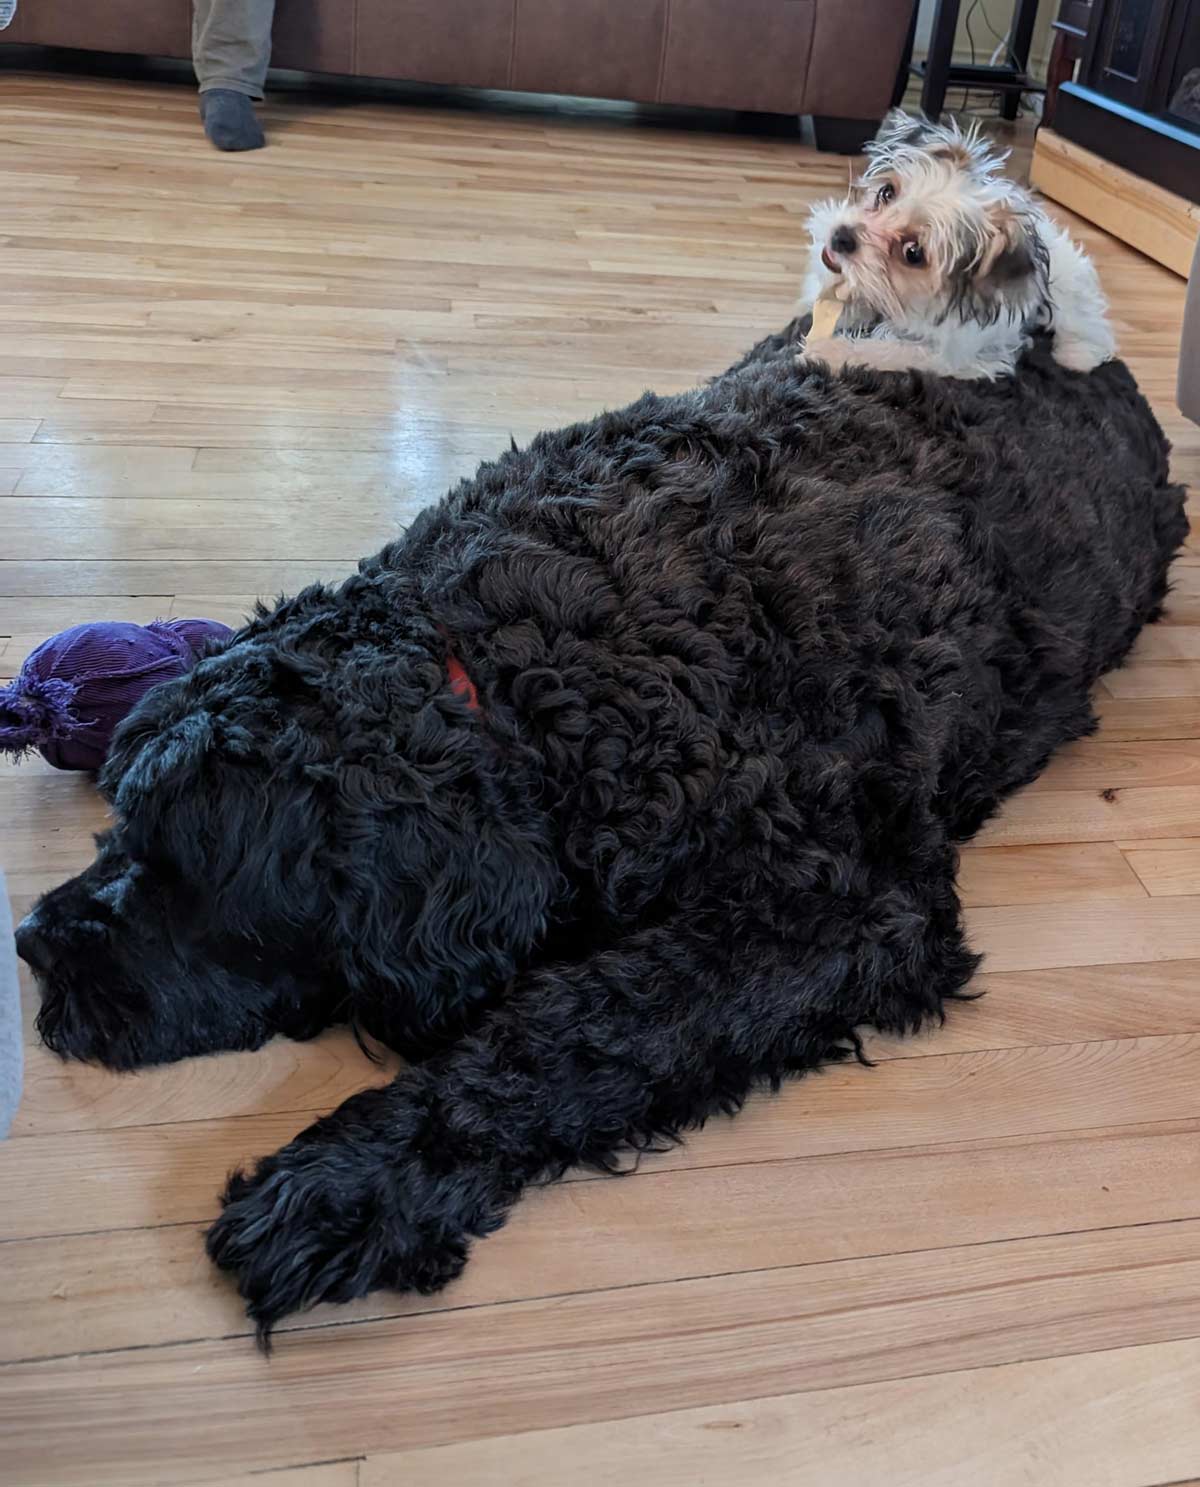 My mom got a puppy and she uses her sister as a rug